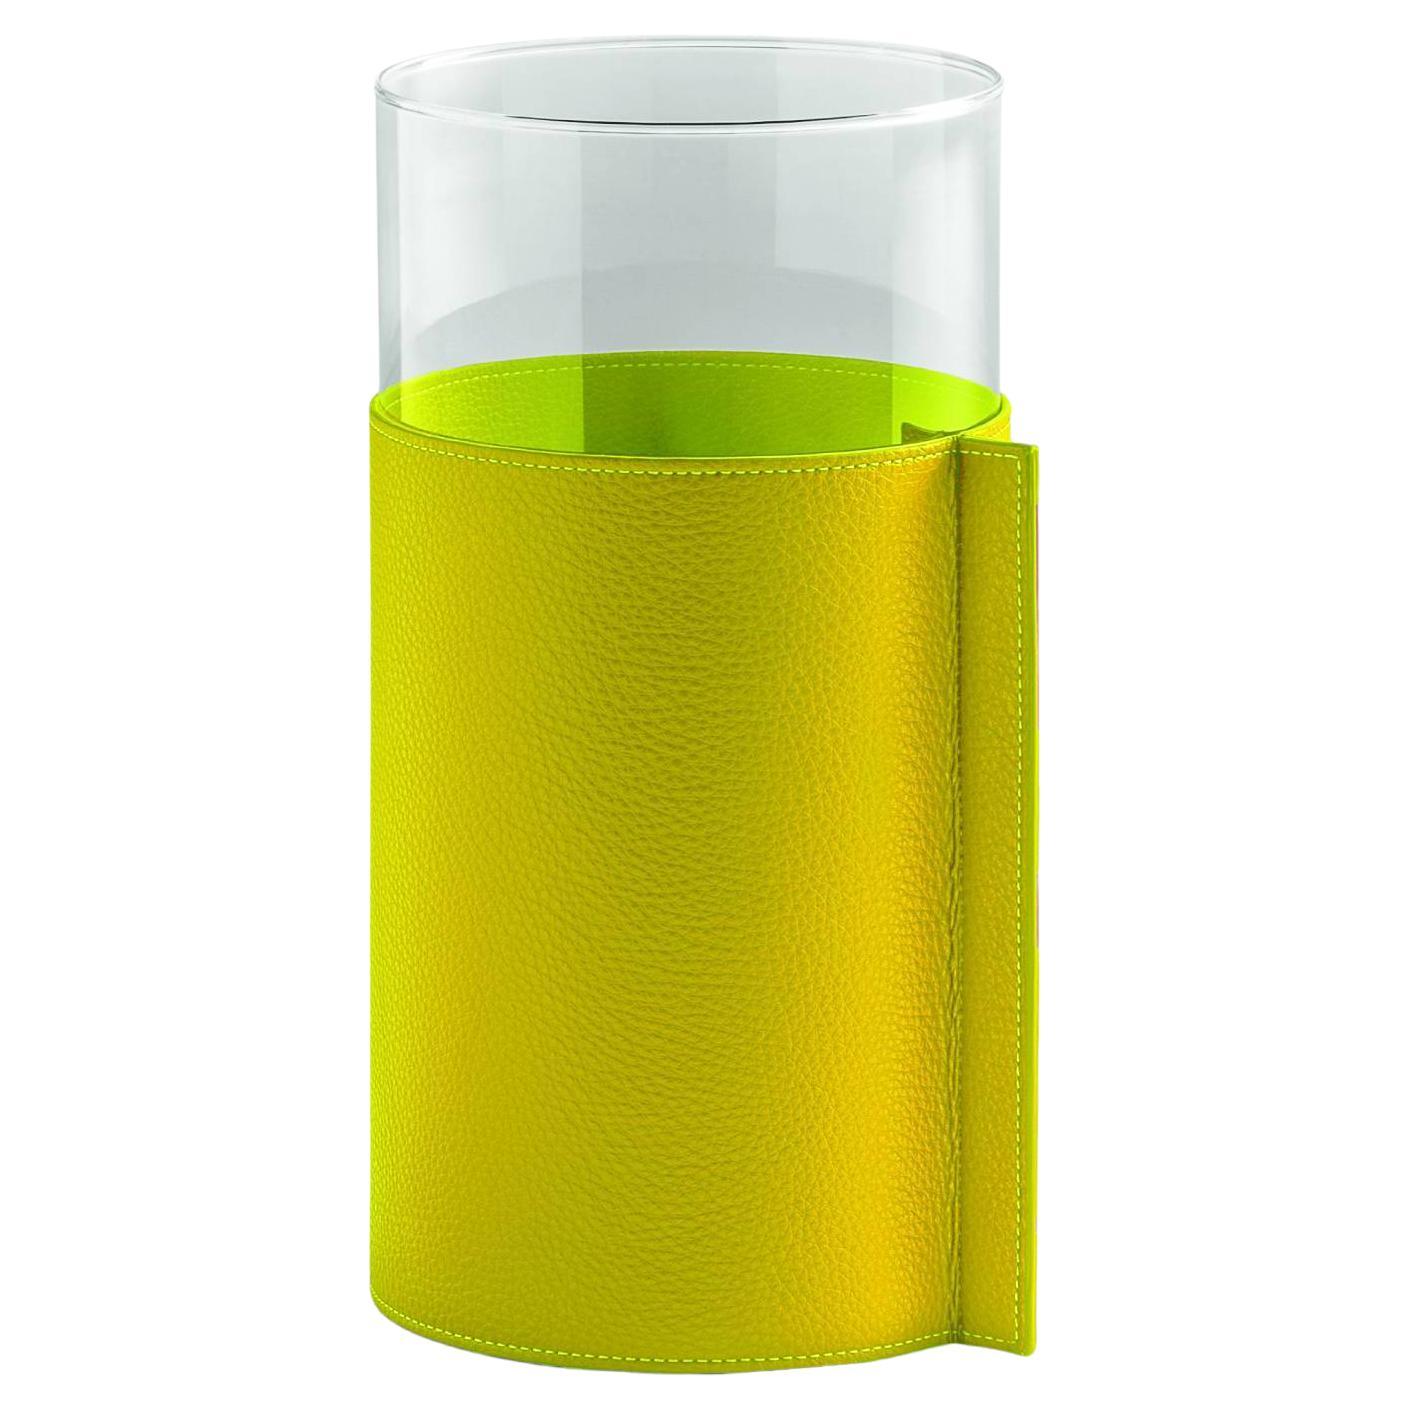 Leather Pot High Glass Vase Covered with Leather Pelle SC 140 Mimosa Yellow For Sale